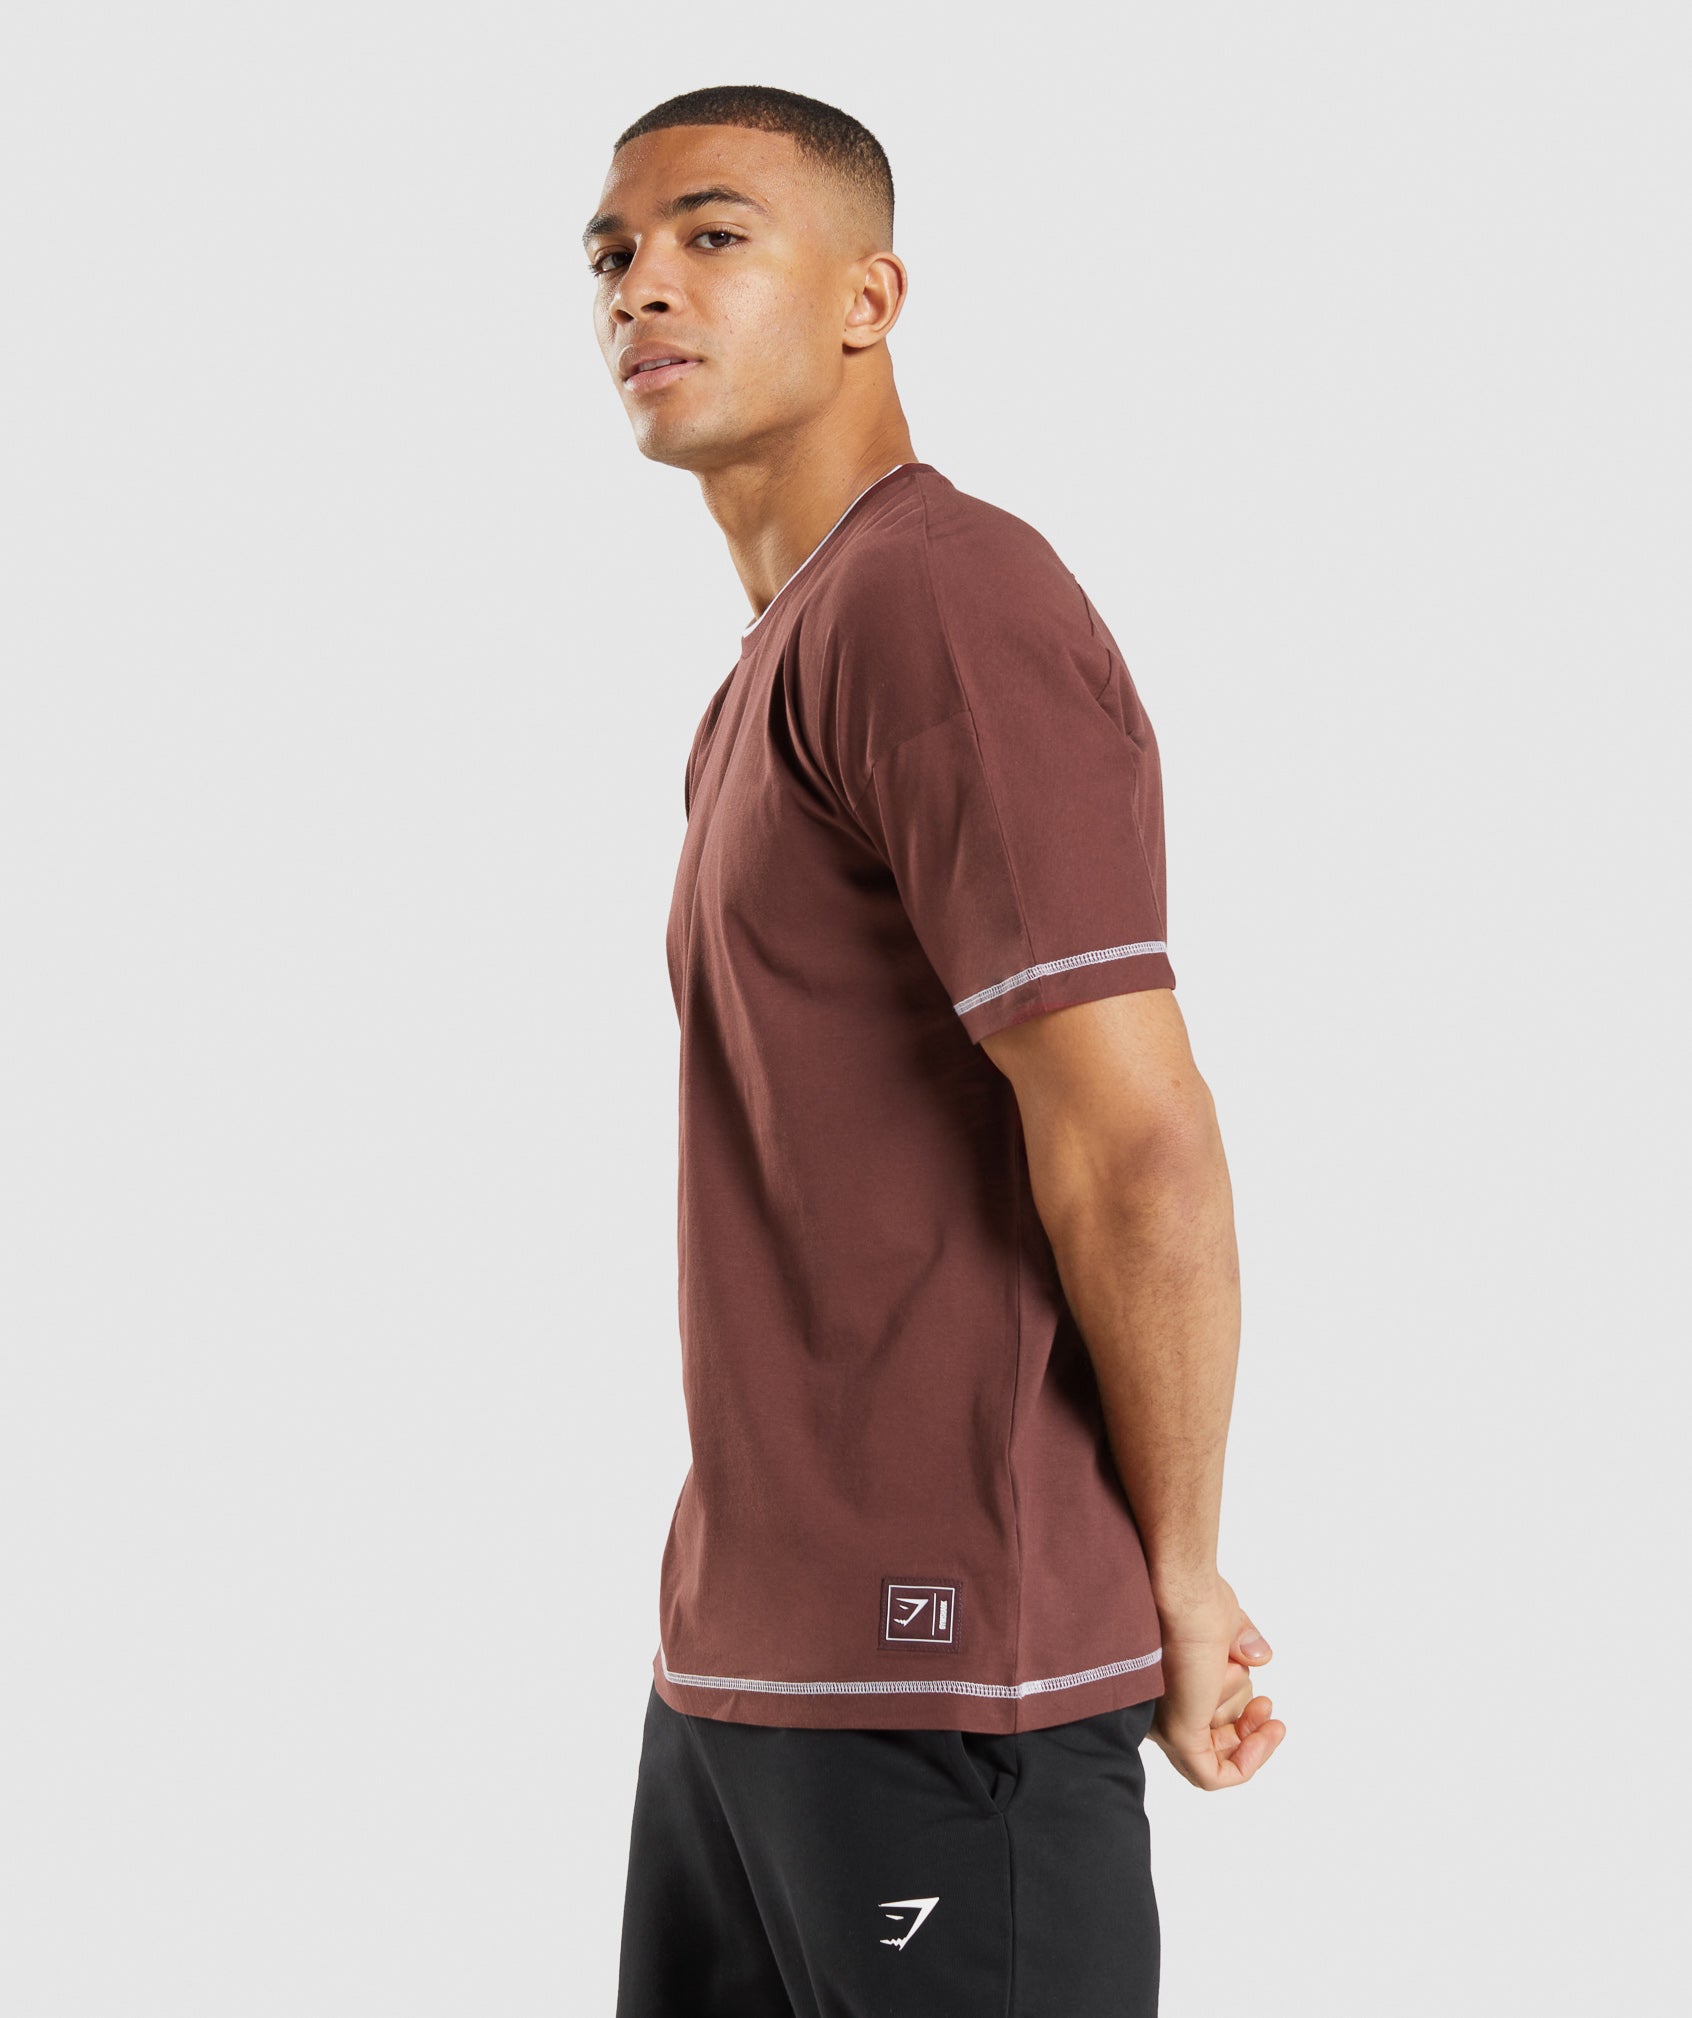 Recess T-Shirt in Cherry Brown/White - view 3